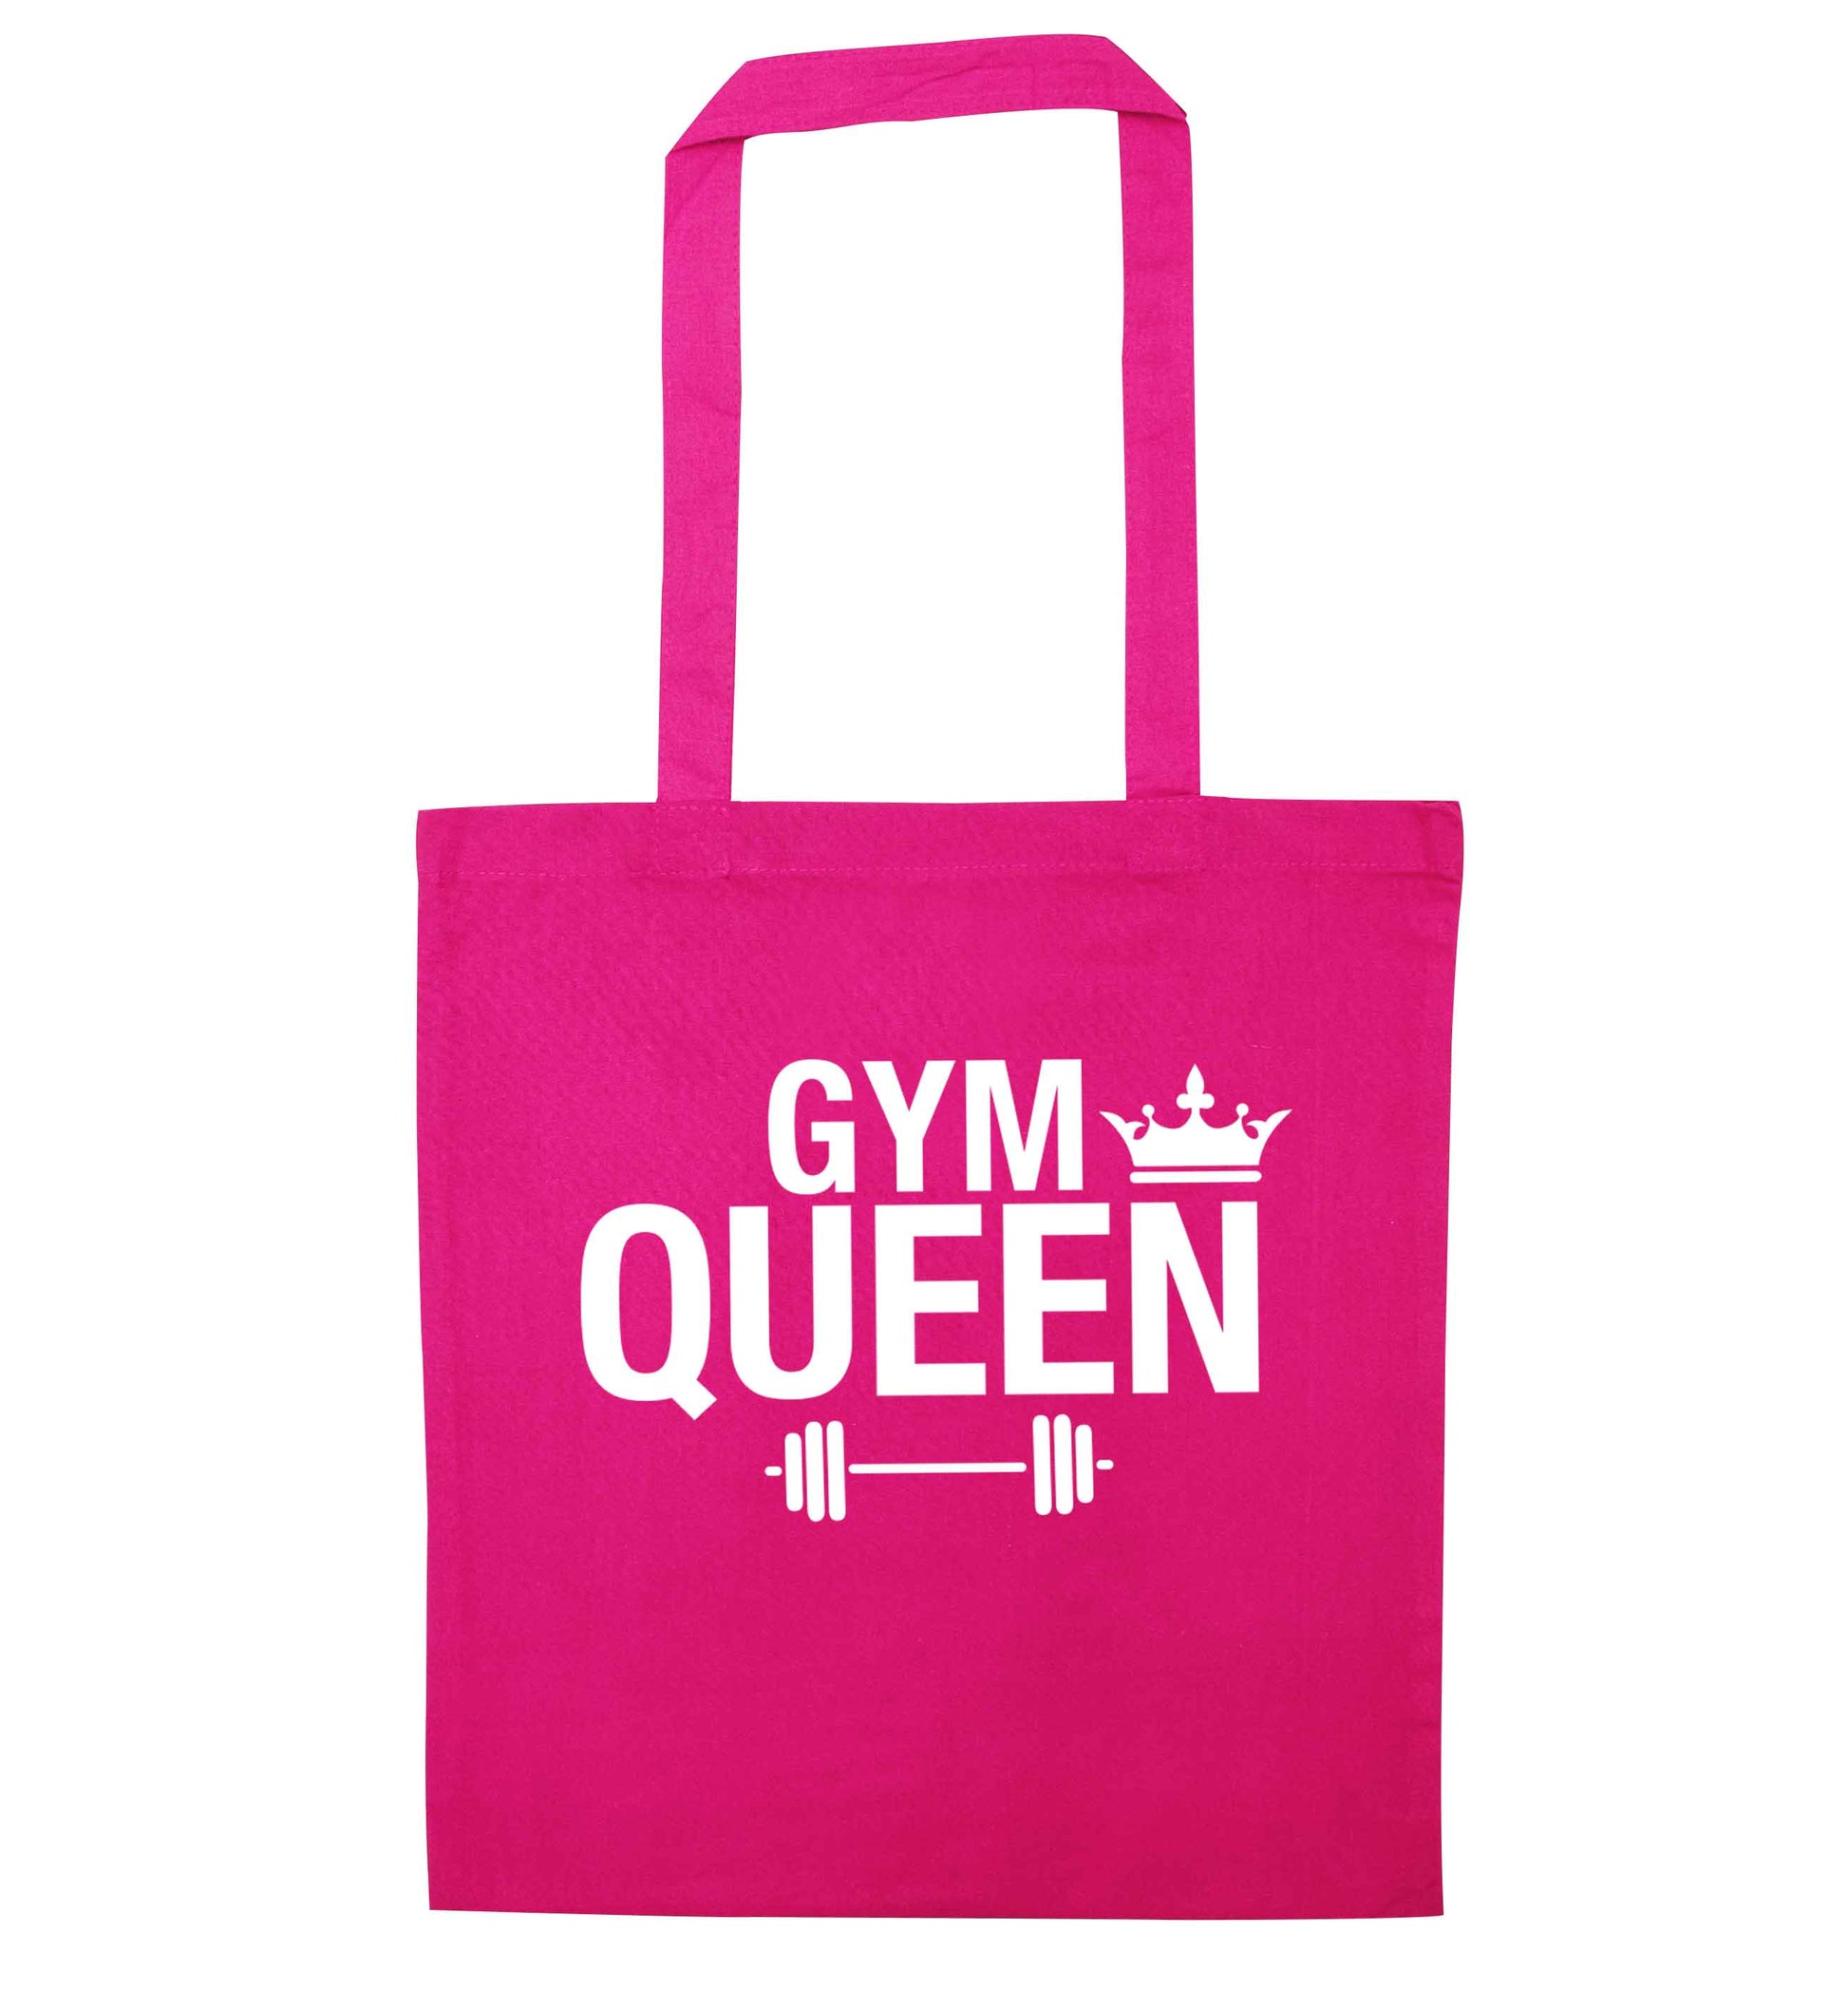 Gym queen pink tote bag